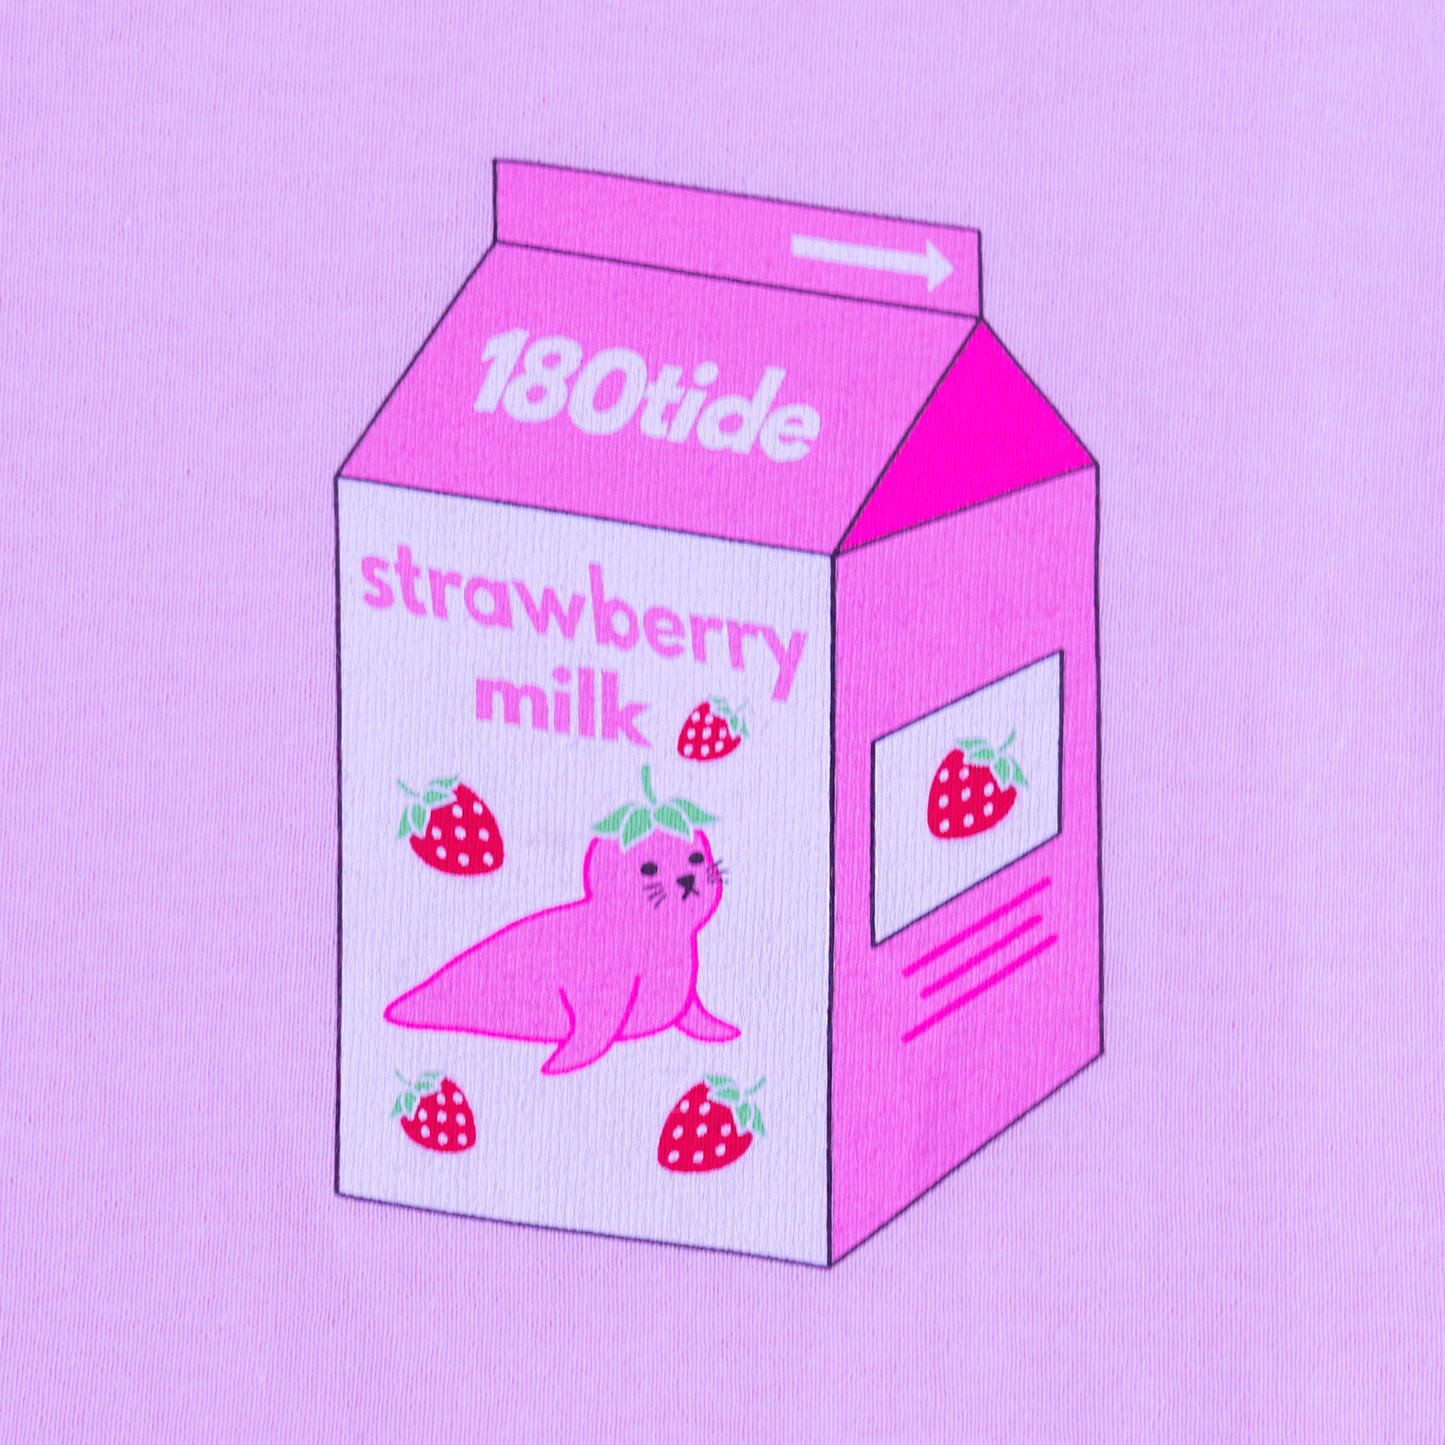 Strawberry Seal Clothing, Milk Trio Capsule Collection.Banana Dolphin Clothing, Milk Trio Capsule Collection.